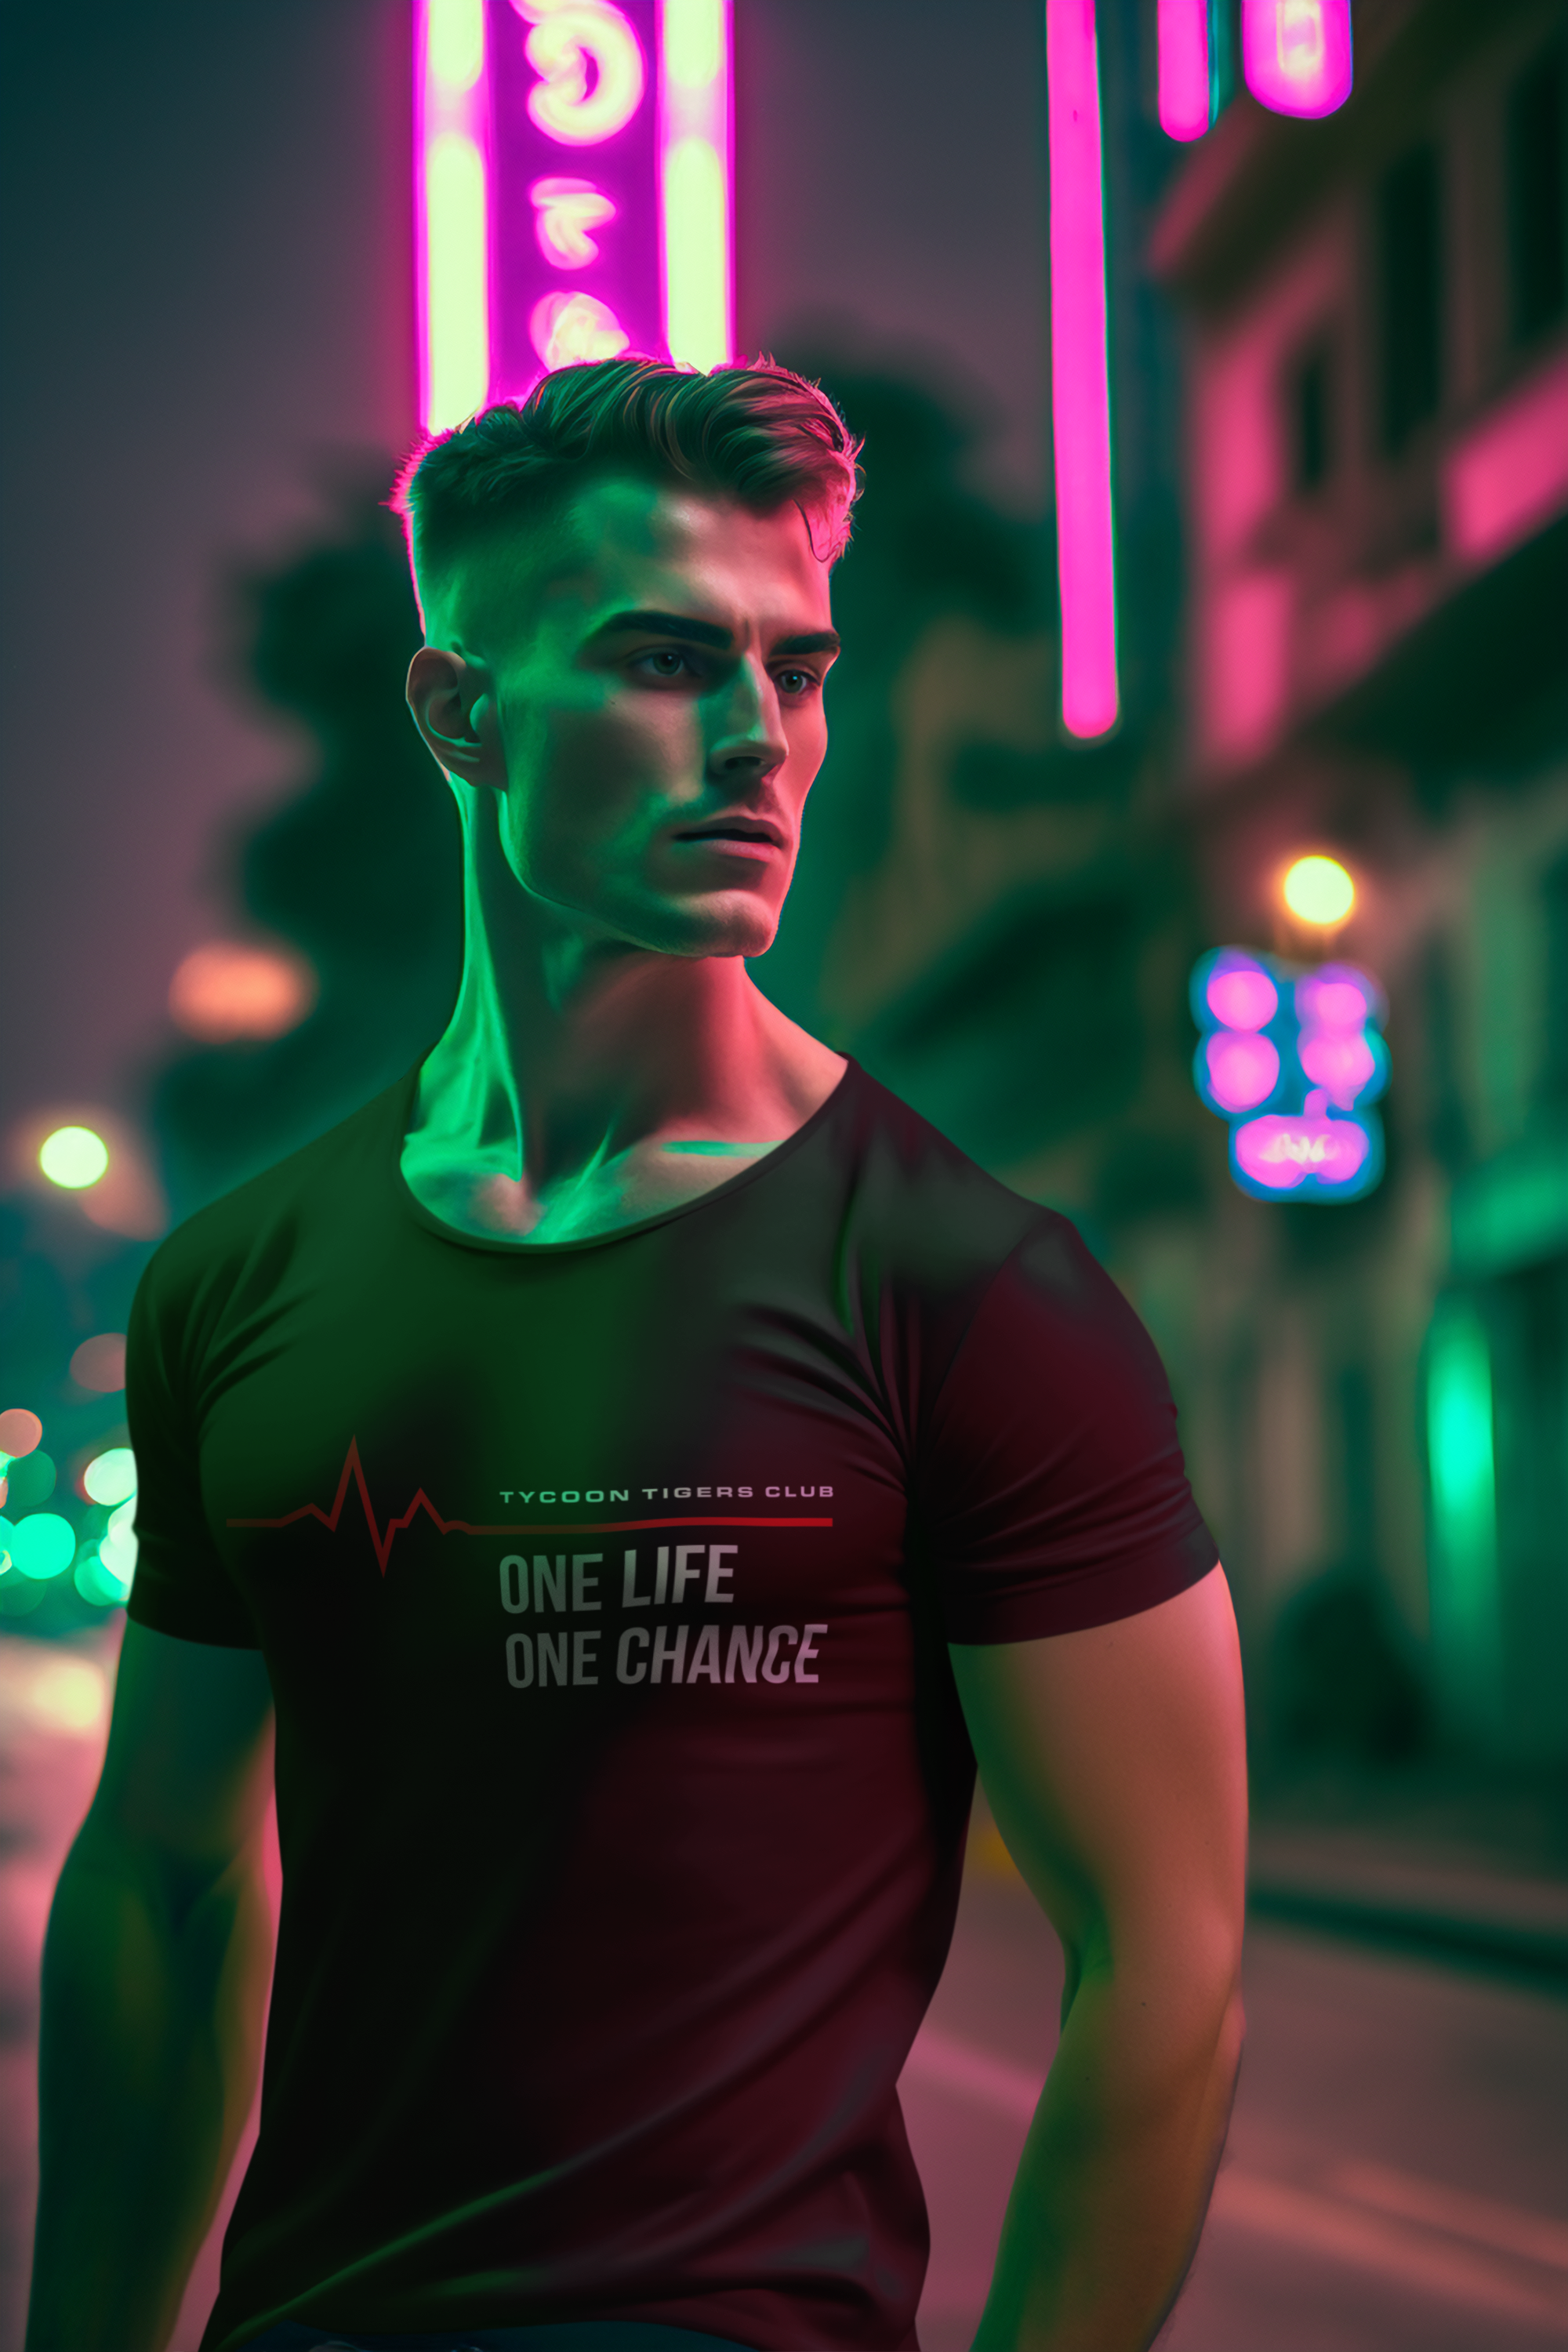 One Life - T-Shirt